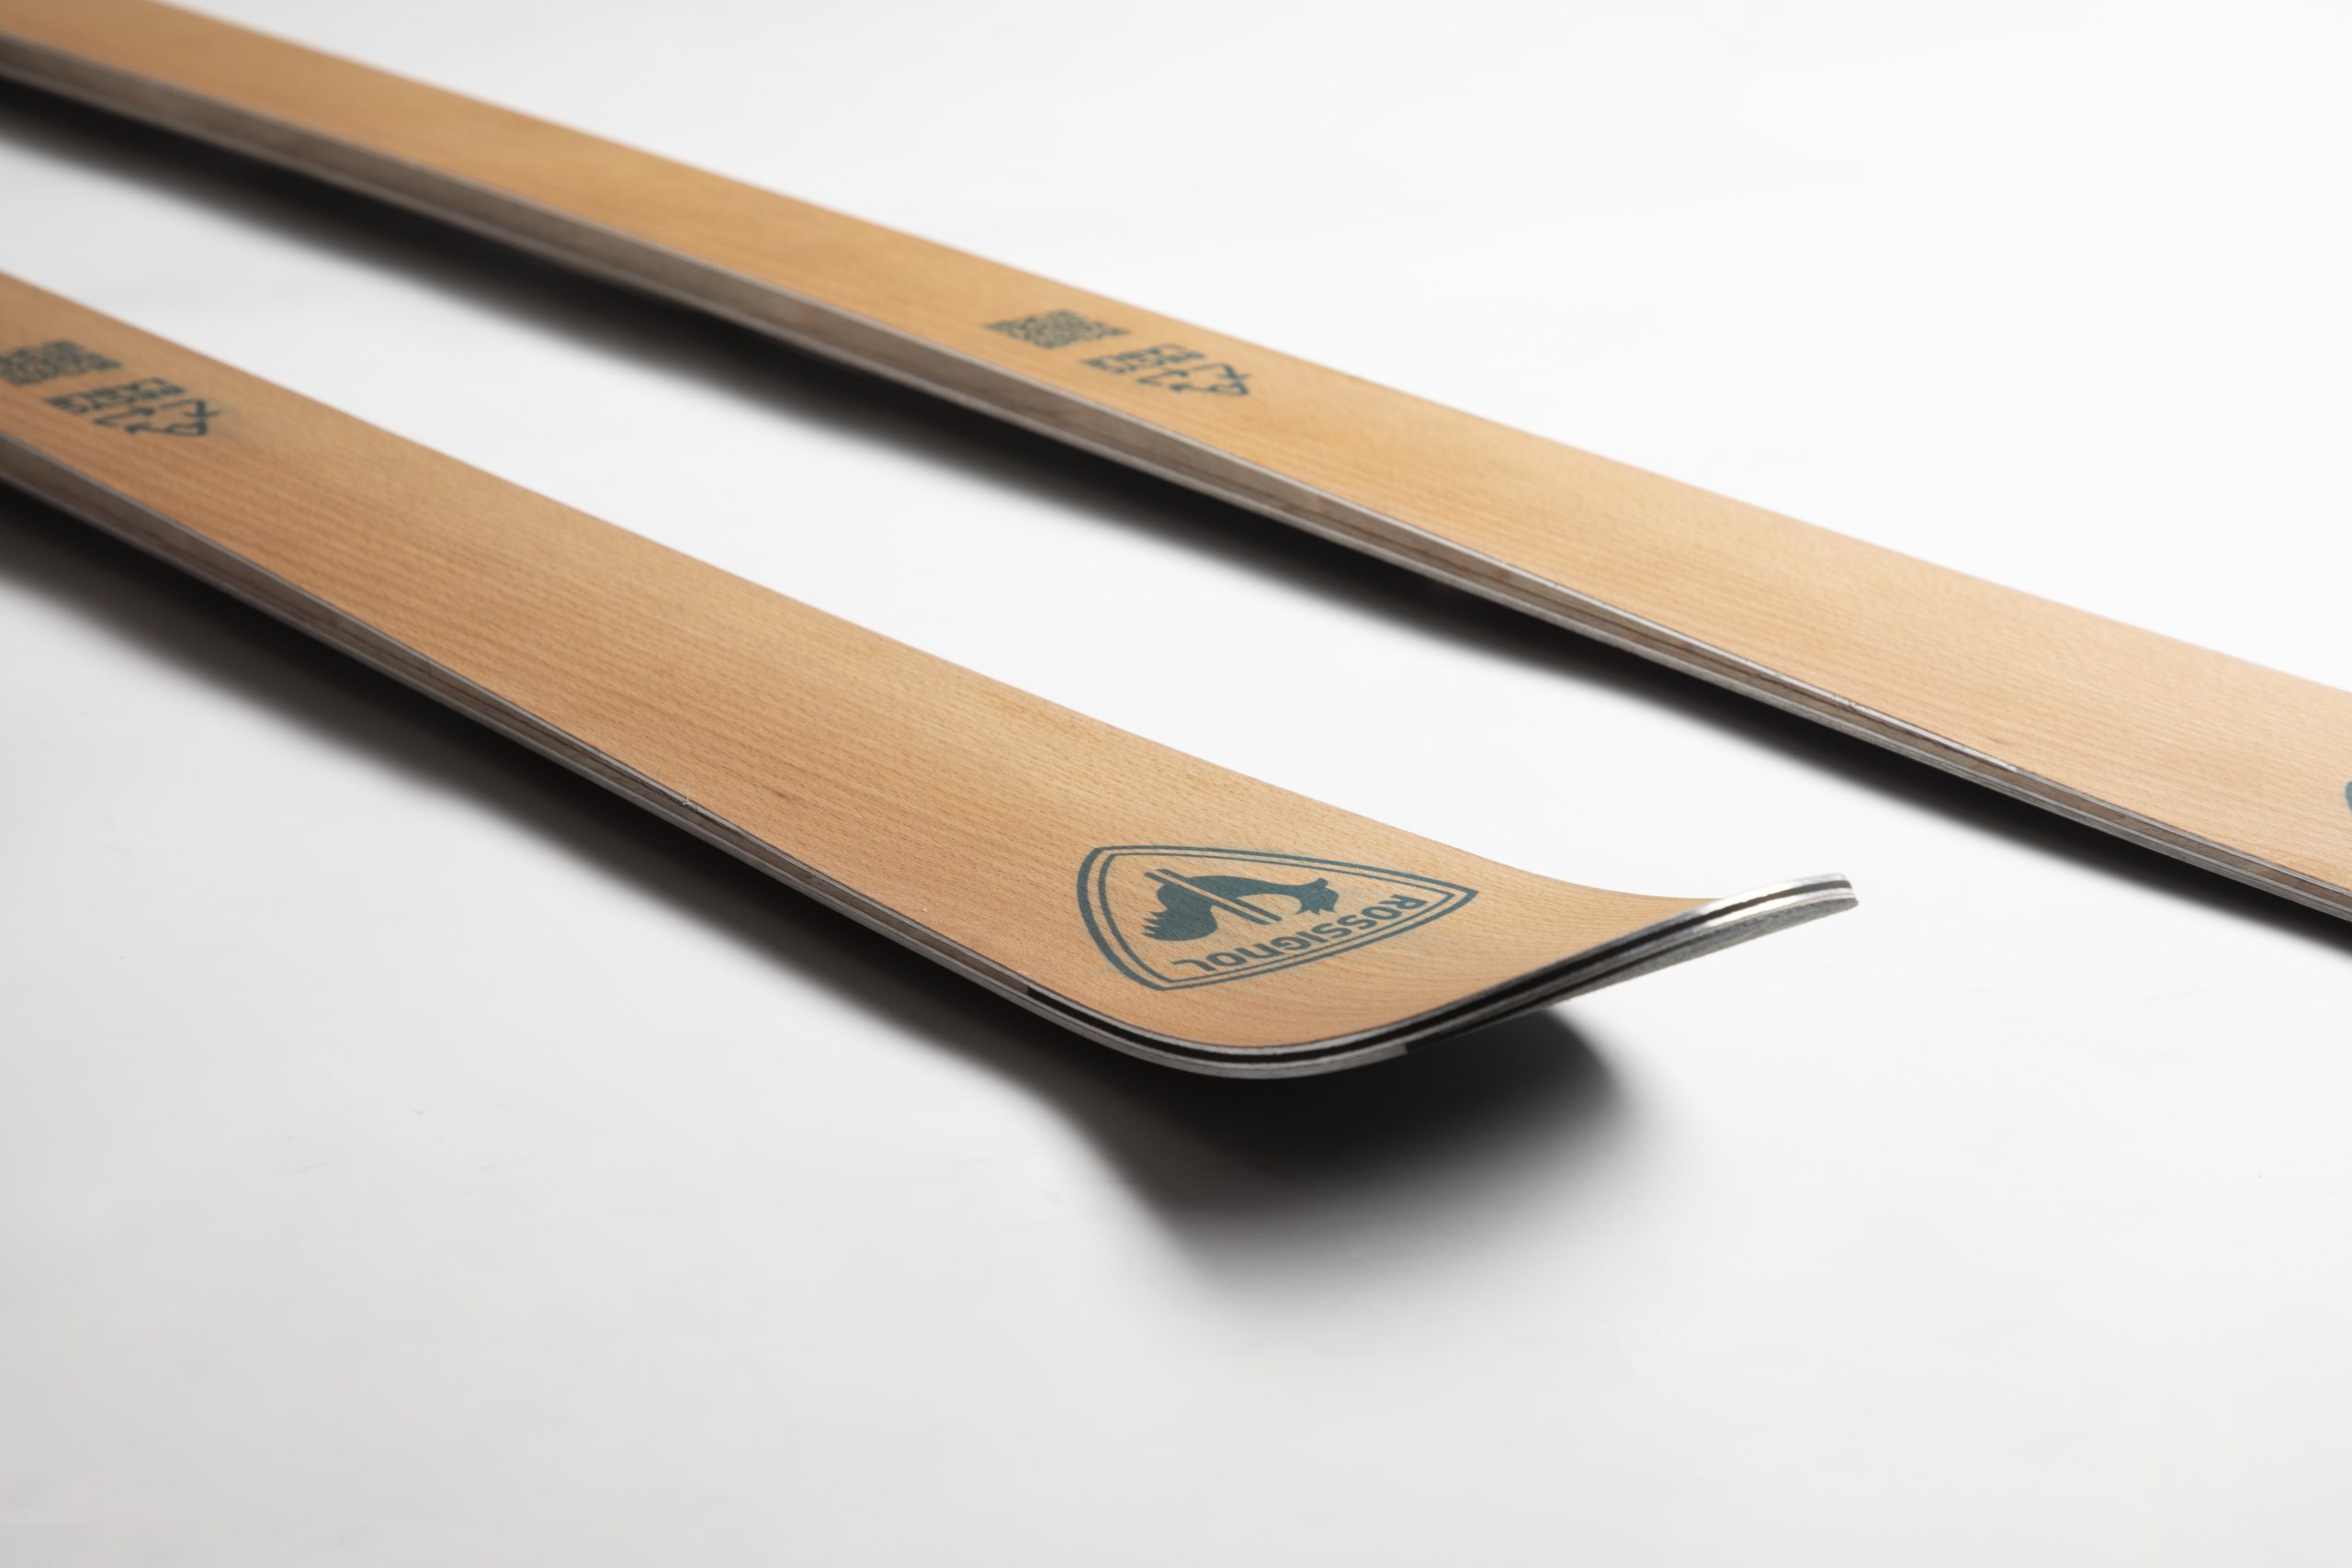 ROSSIGNOL RELEASES FIRST RECYCLABLE SKI